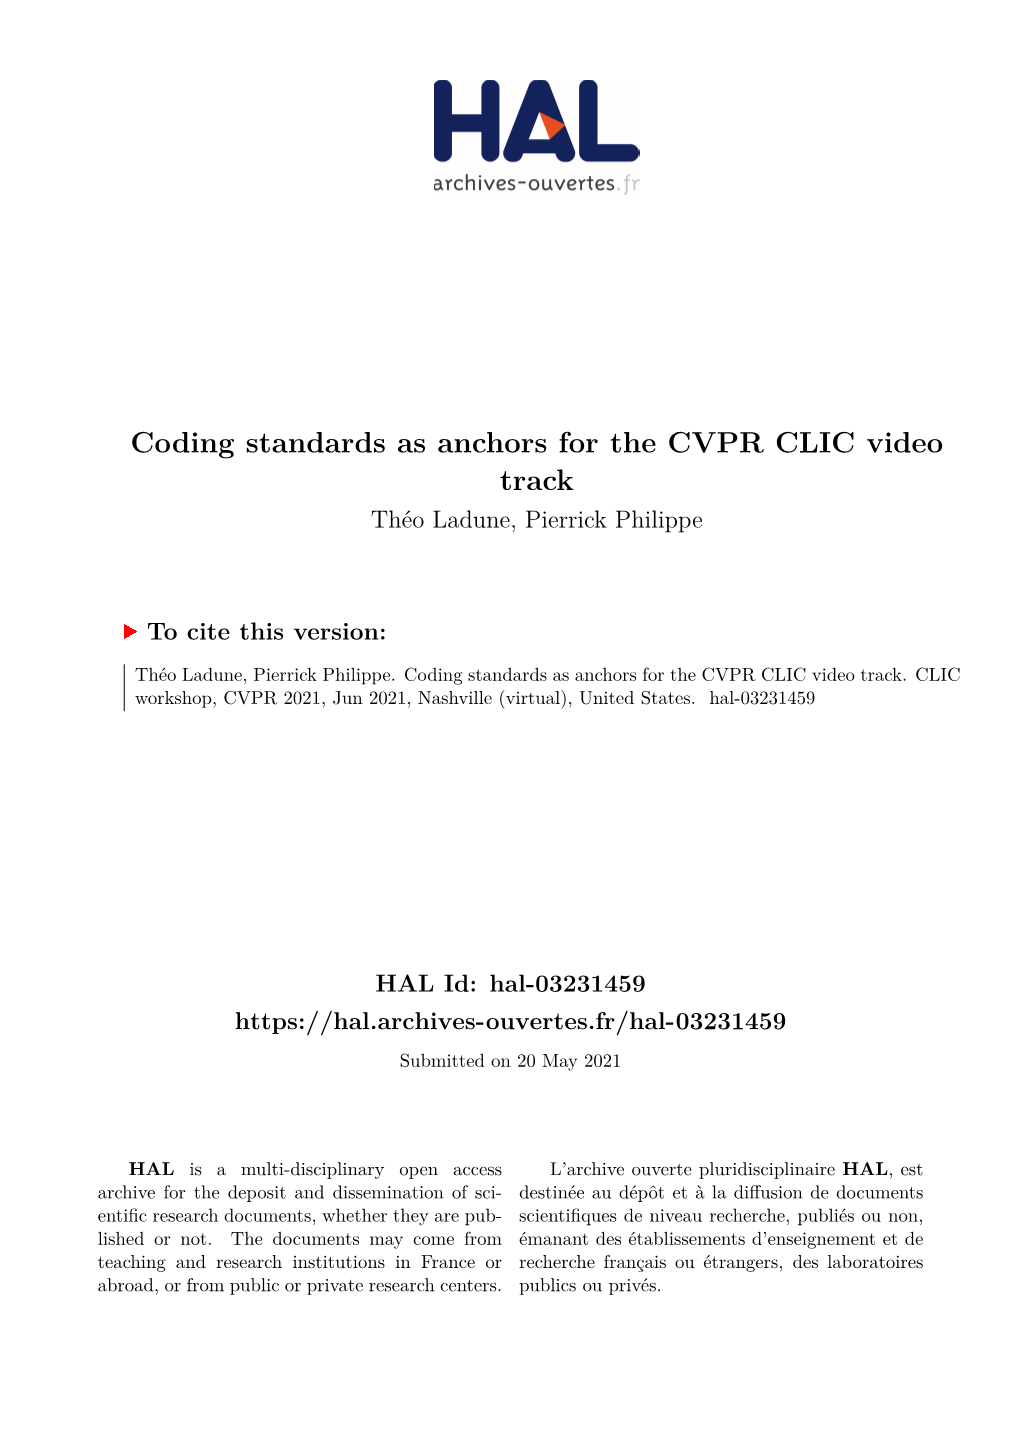 Coding Standards As Anchors for the CVPR CLIC Video Track Théo Ladune, Pierrick Philippe